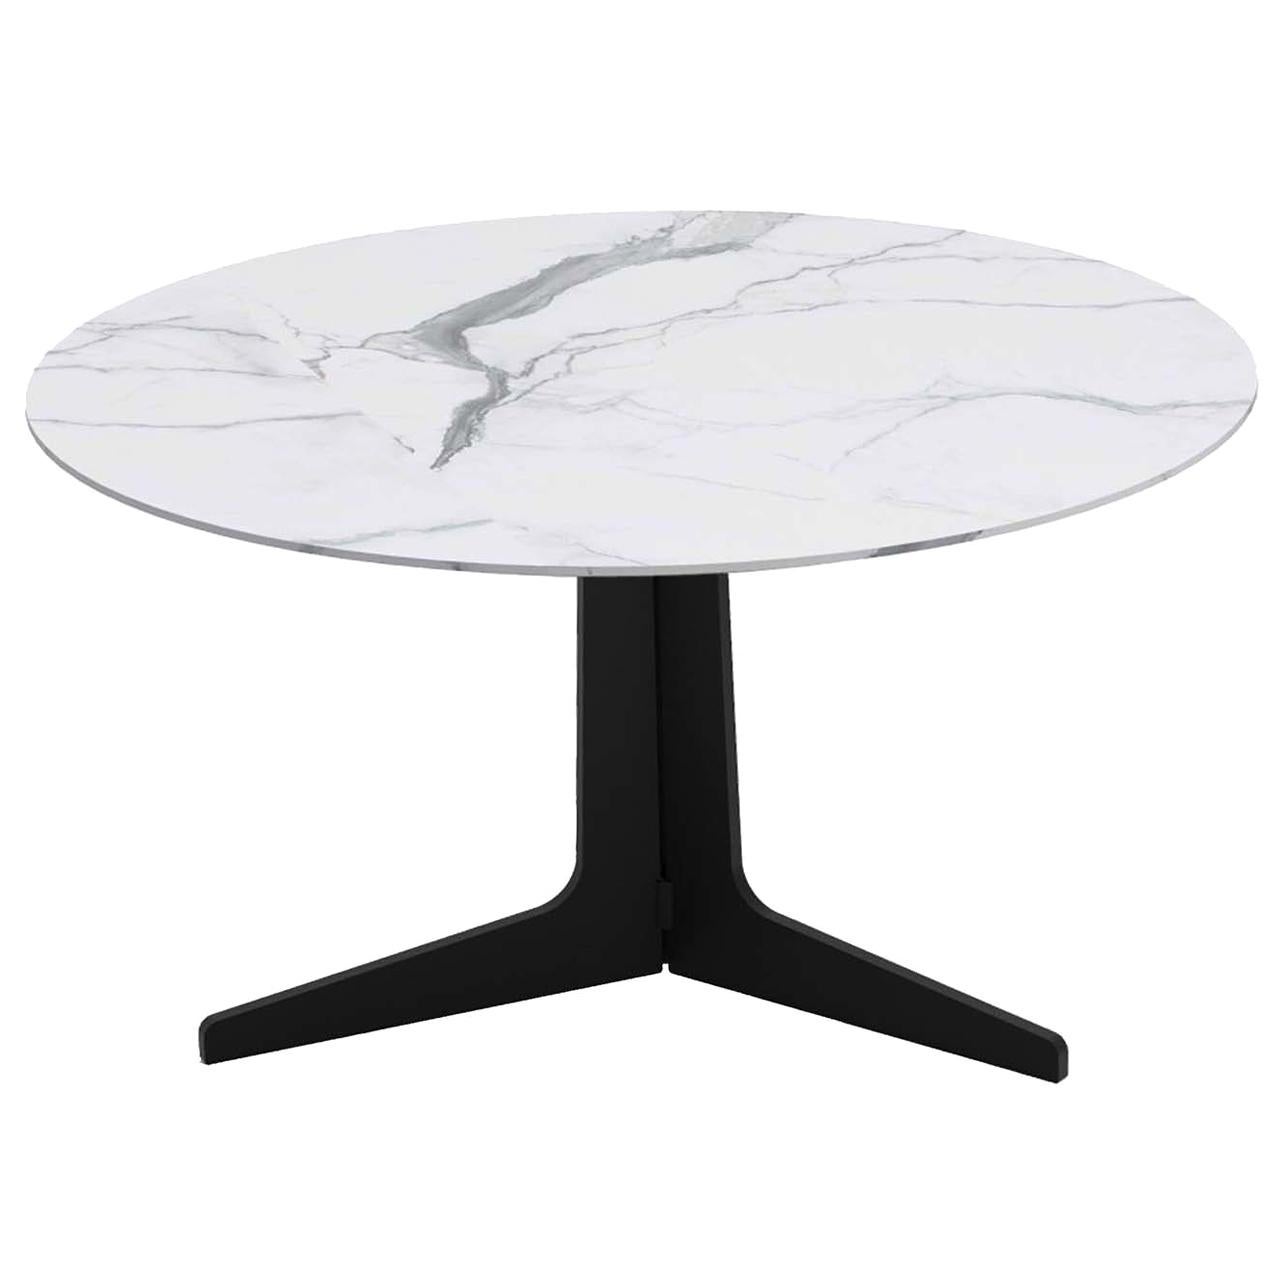 Blake Round Coffee Table with Calacatta Marble Top